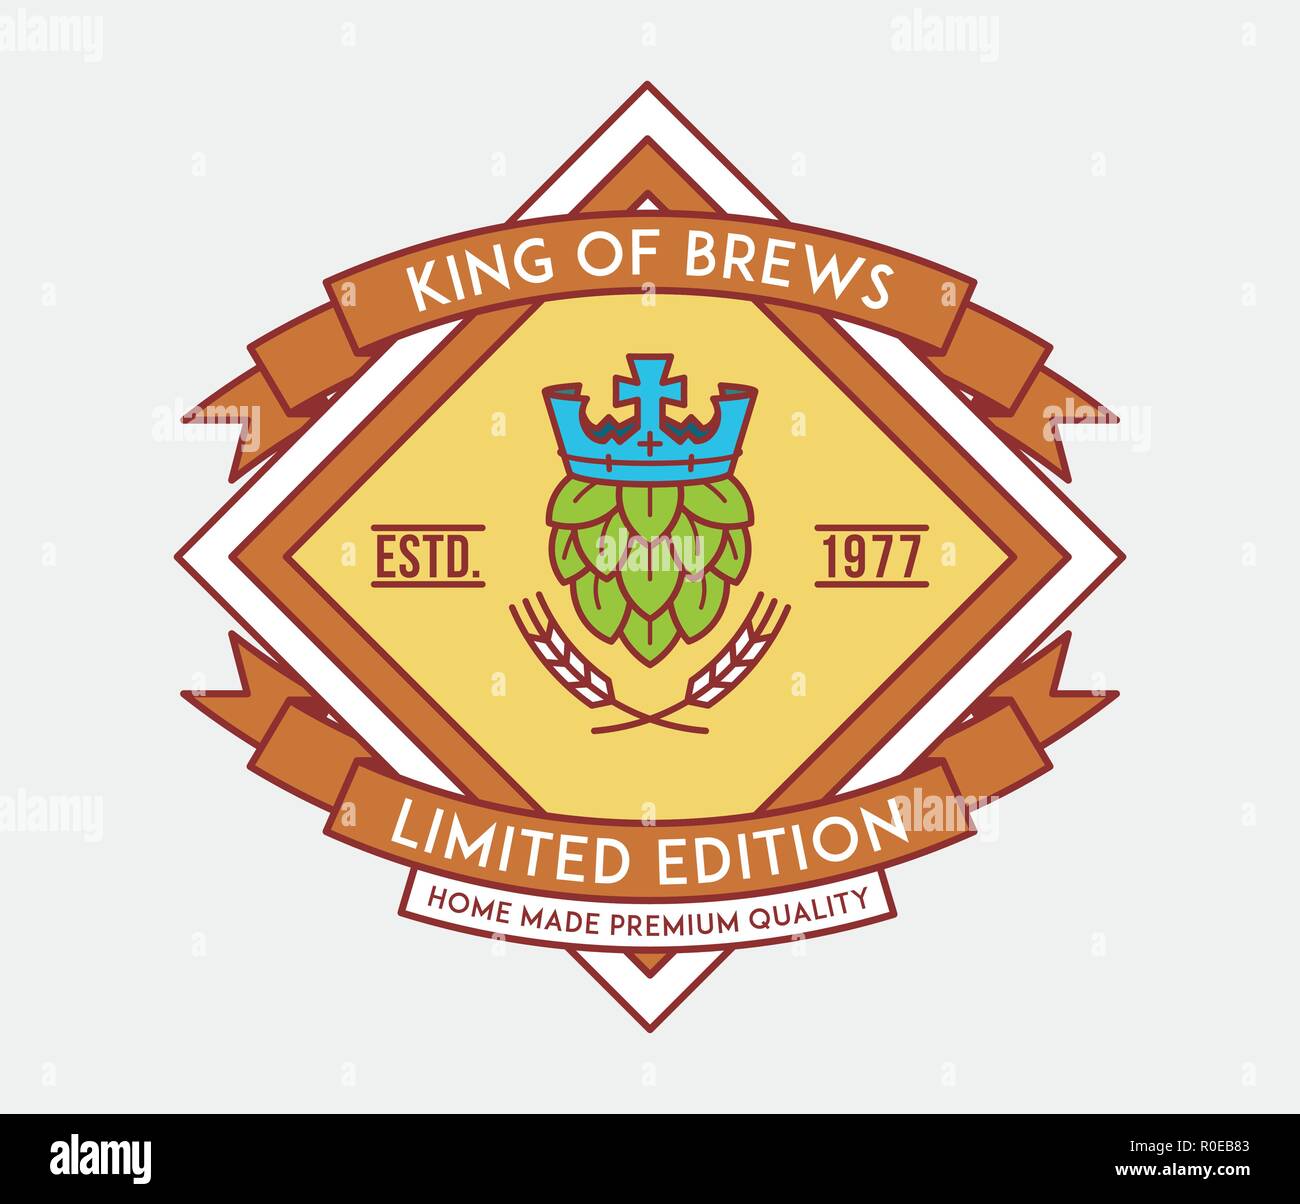 Beer king of brewers is a vector illustration about drinking Stock Vector